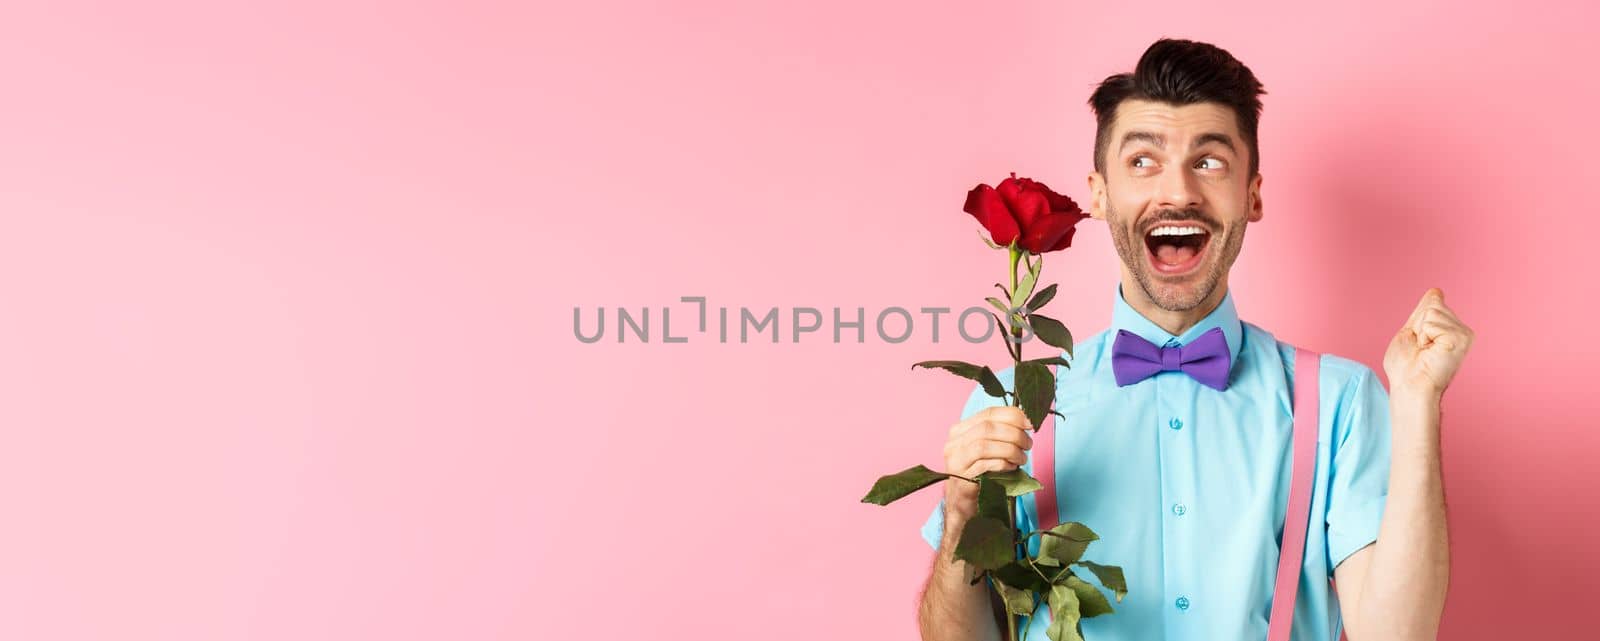 Romance and Valentines day concept. Cheerful man in bow-tie screaming from happiness, holding red rose and jumping on date, standing over pink background.